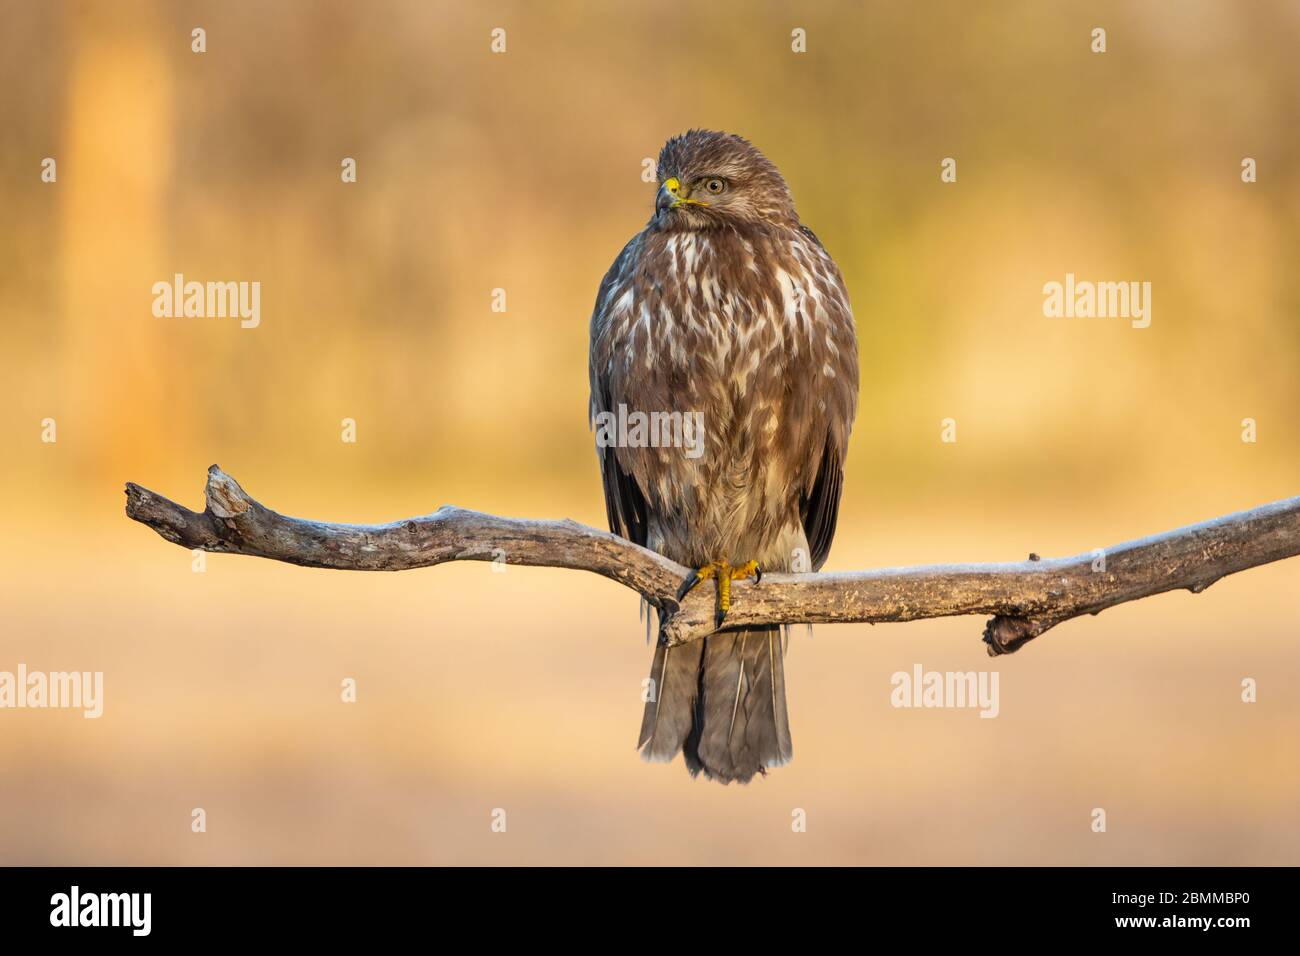 Common Buzzard (Buteo buteo) perching on a low branch at sunrise with golden light illuminating the distant background Stock Photo